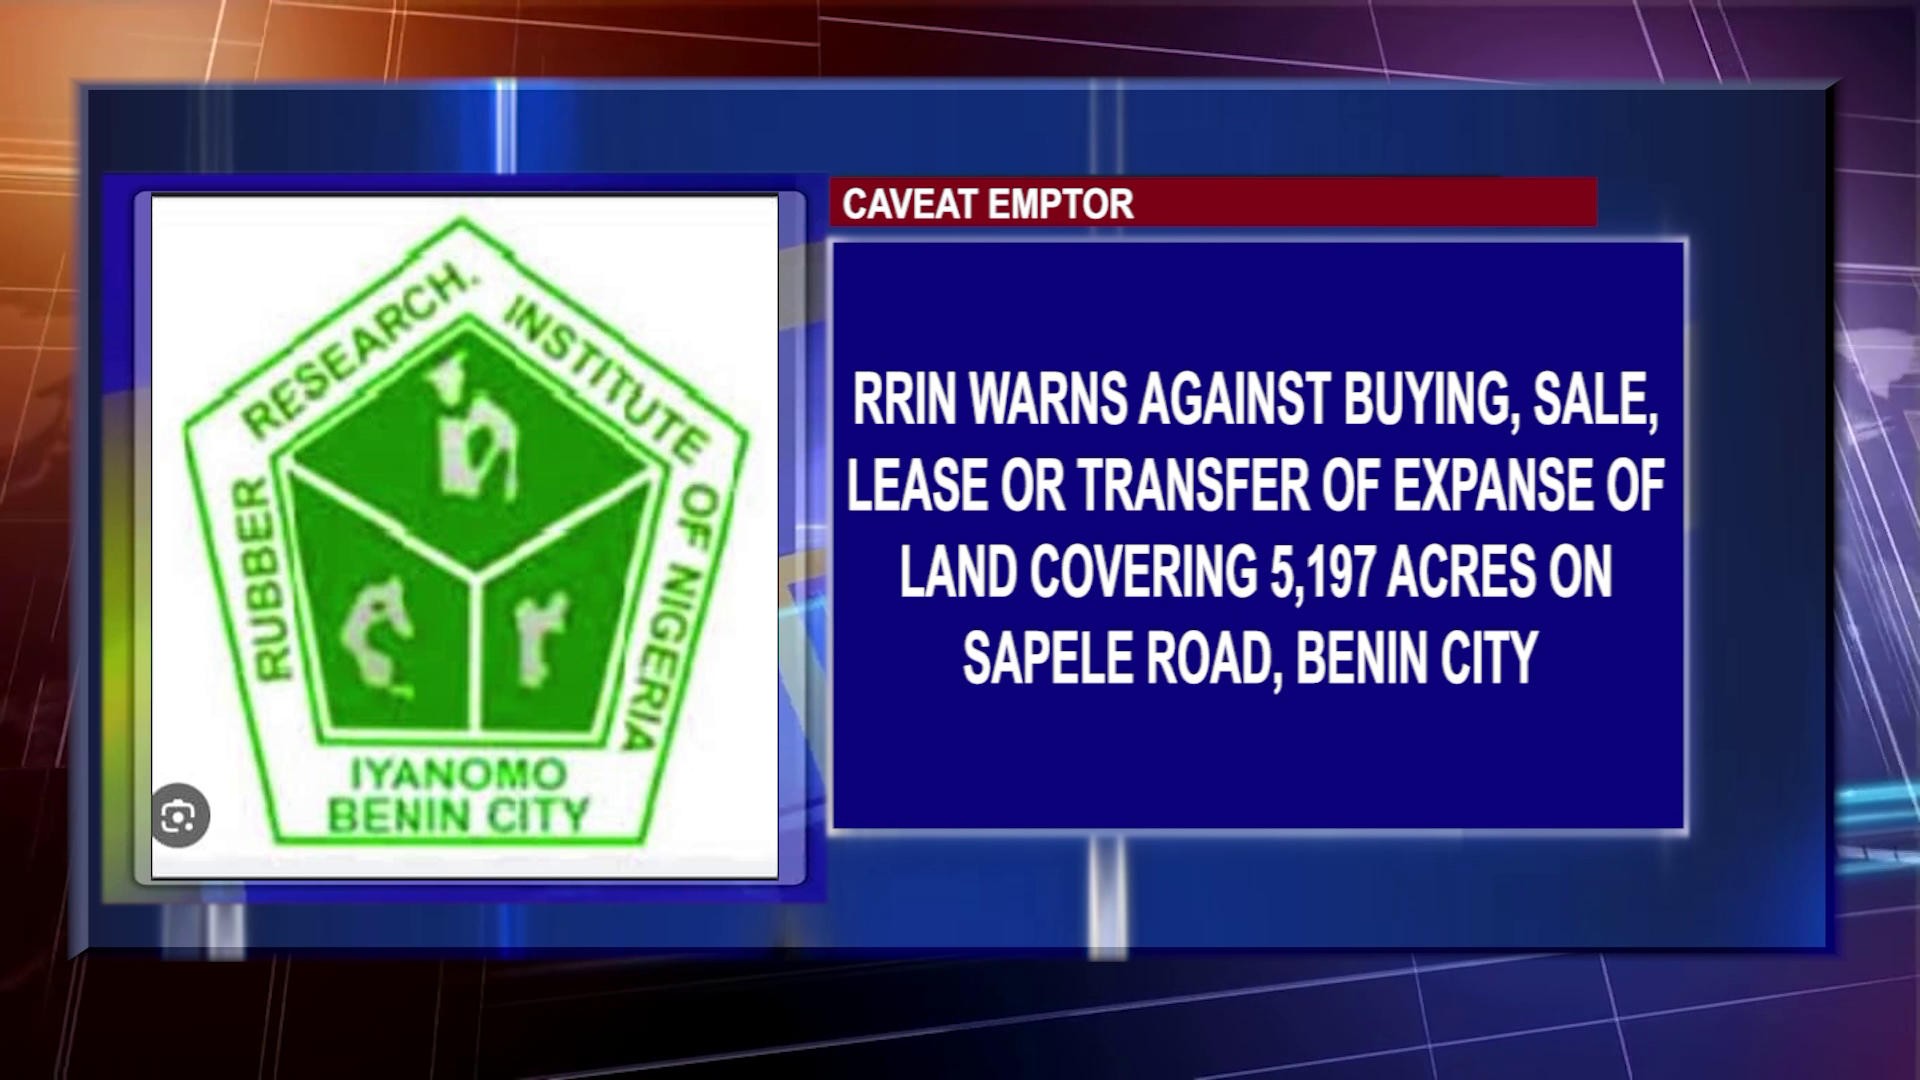 RRIN Warns Against Buying, Sale, Lease Or Transfer Of Expanse Of Land Covering 5,197 Acres On Sapele Road, Benin City